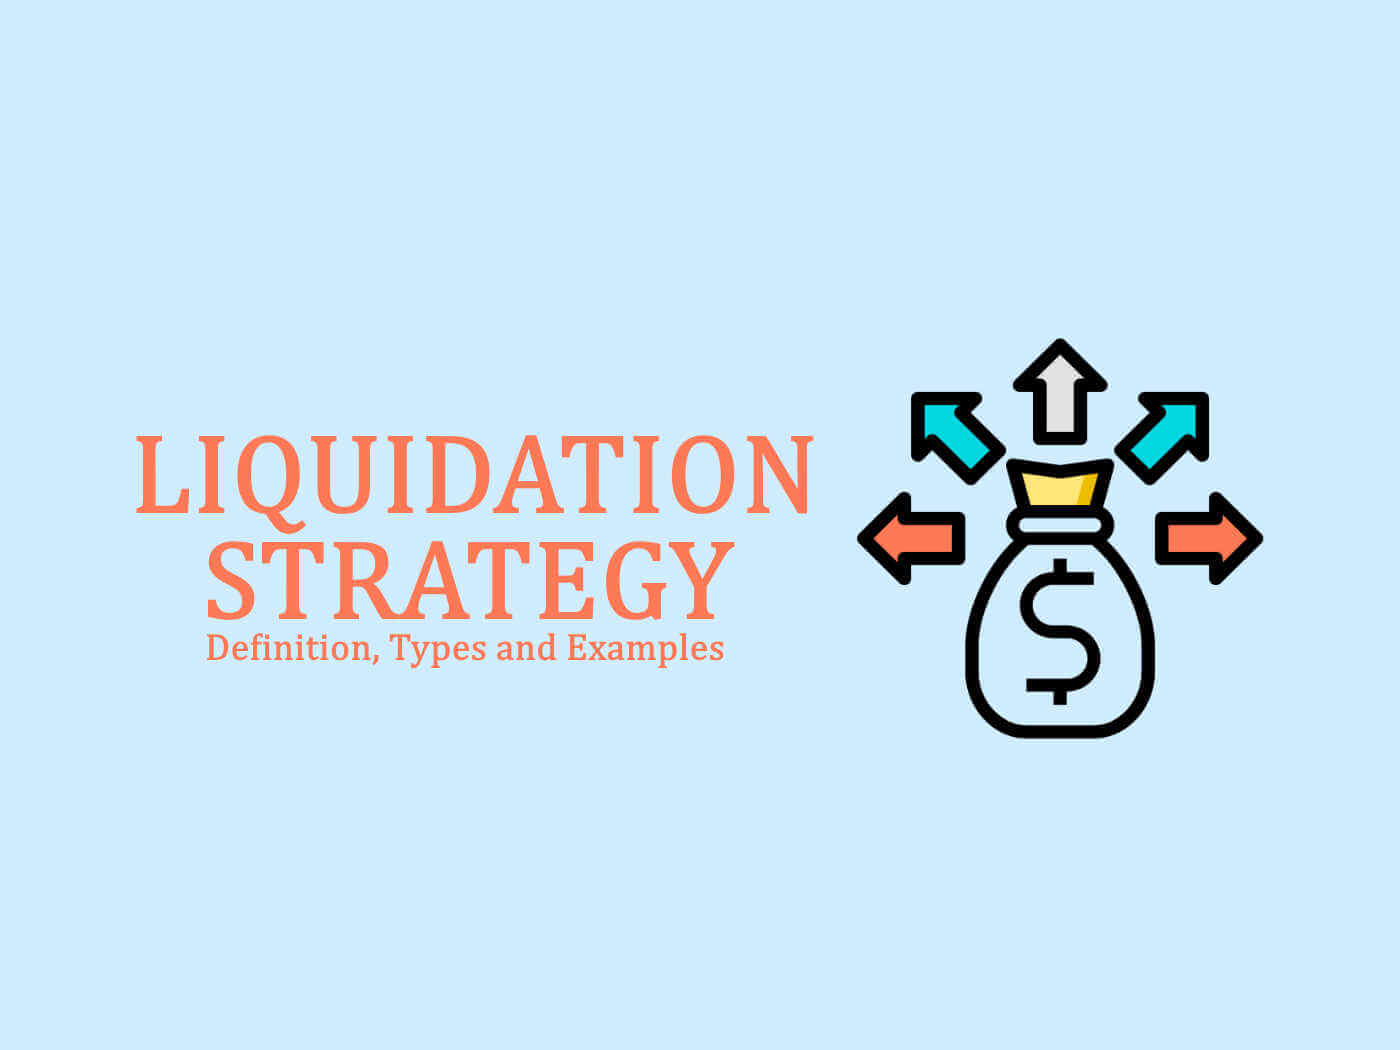 Liquidation Strategy - Definition, Types, Examples, Pros & Cons